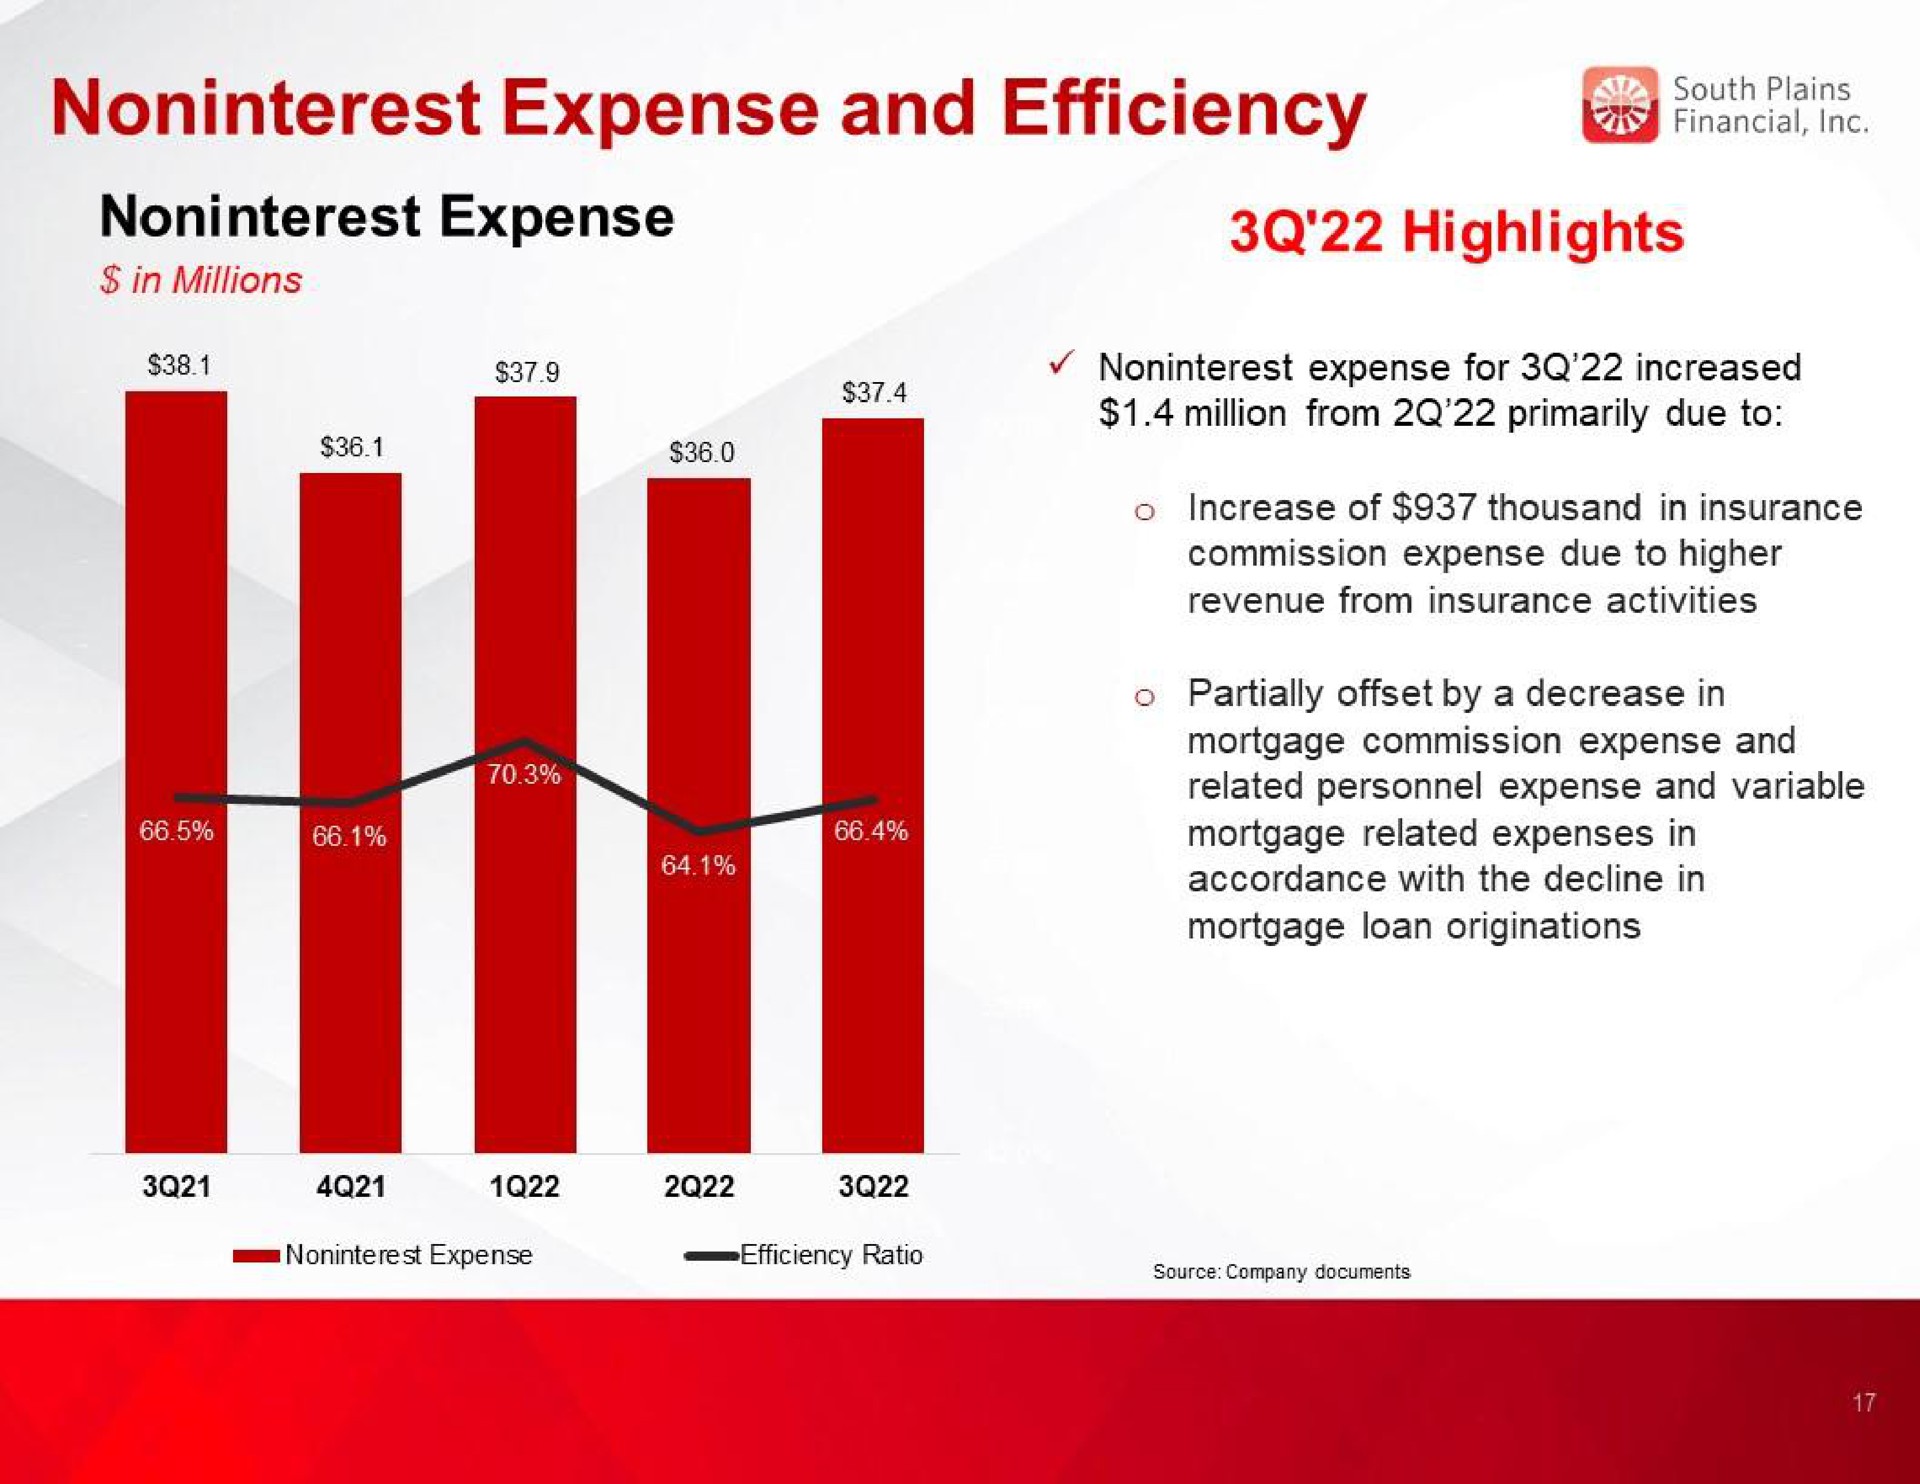 expense and efficiency financial expense highlights | South Plains Financial